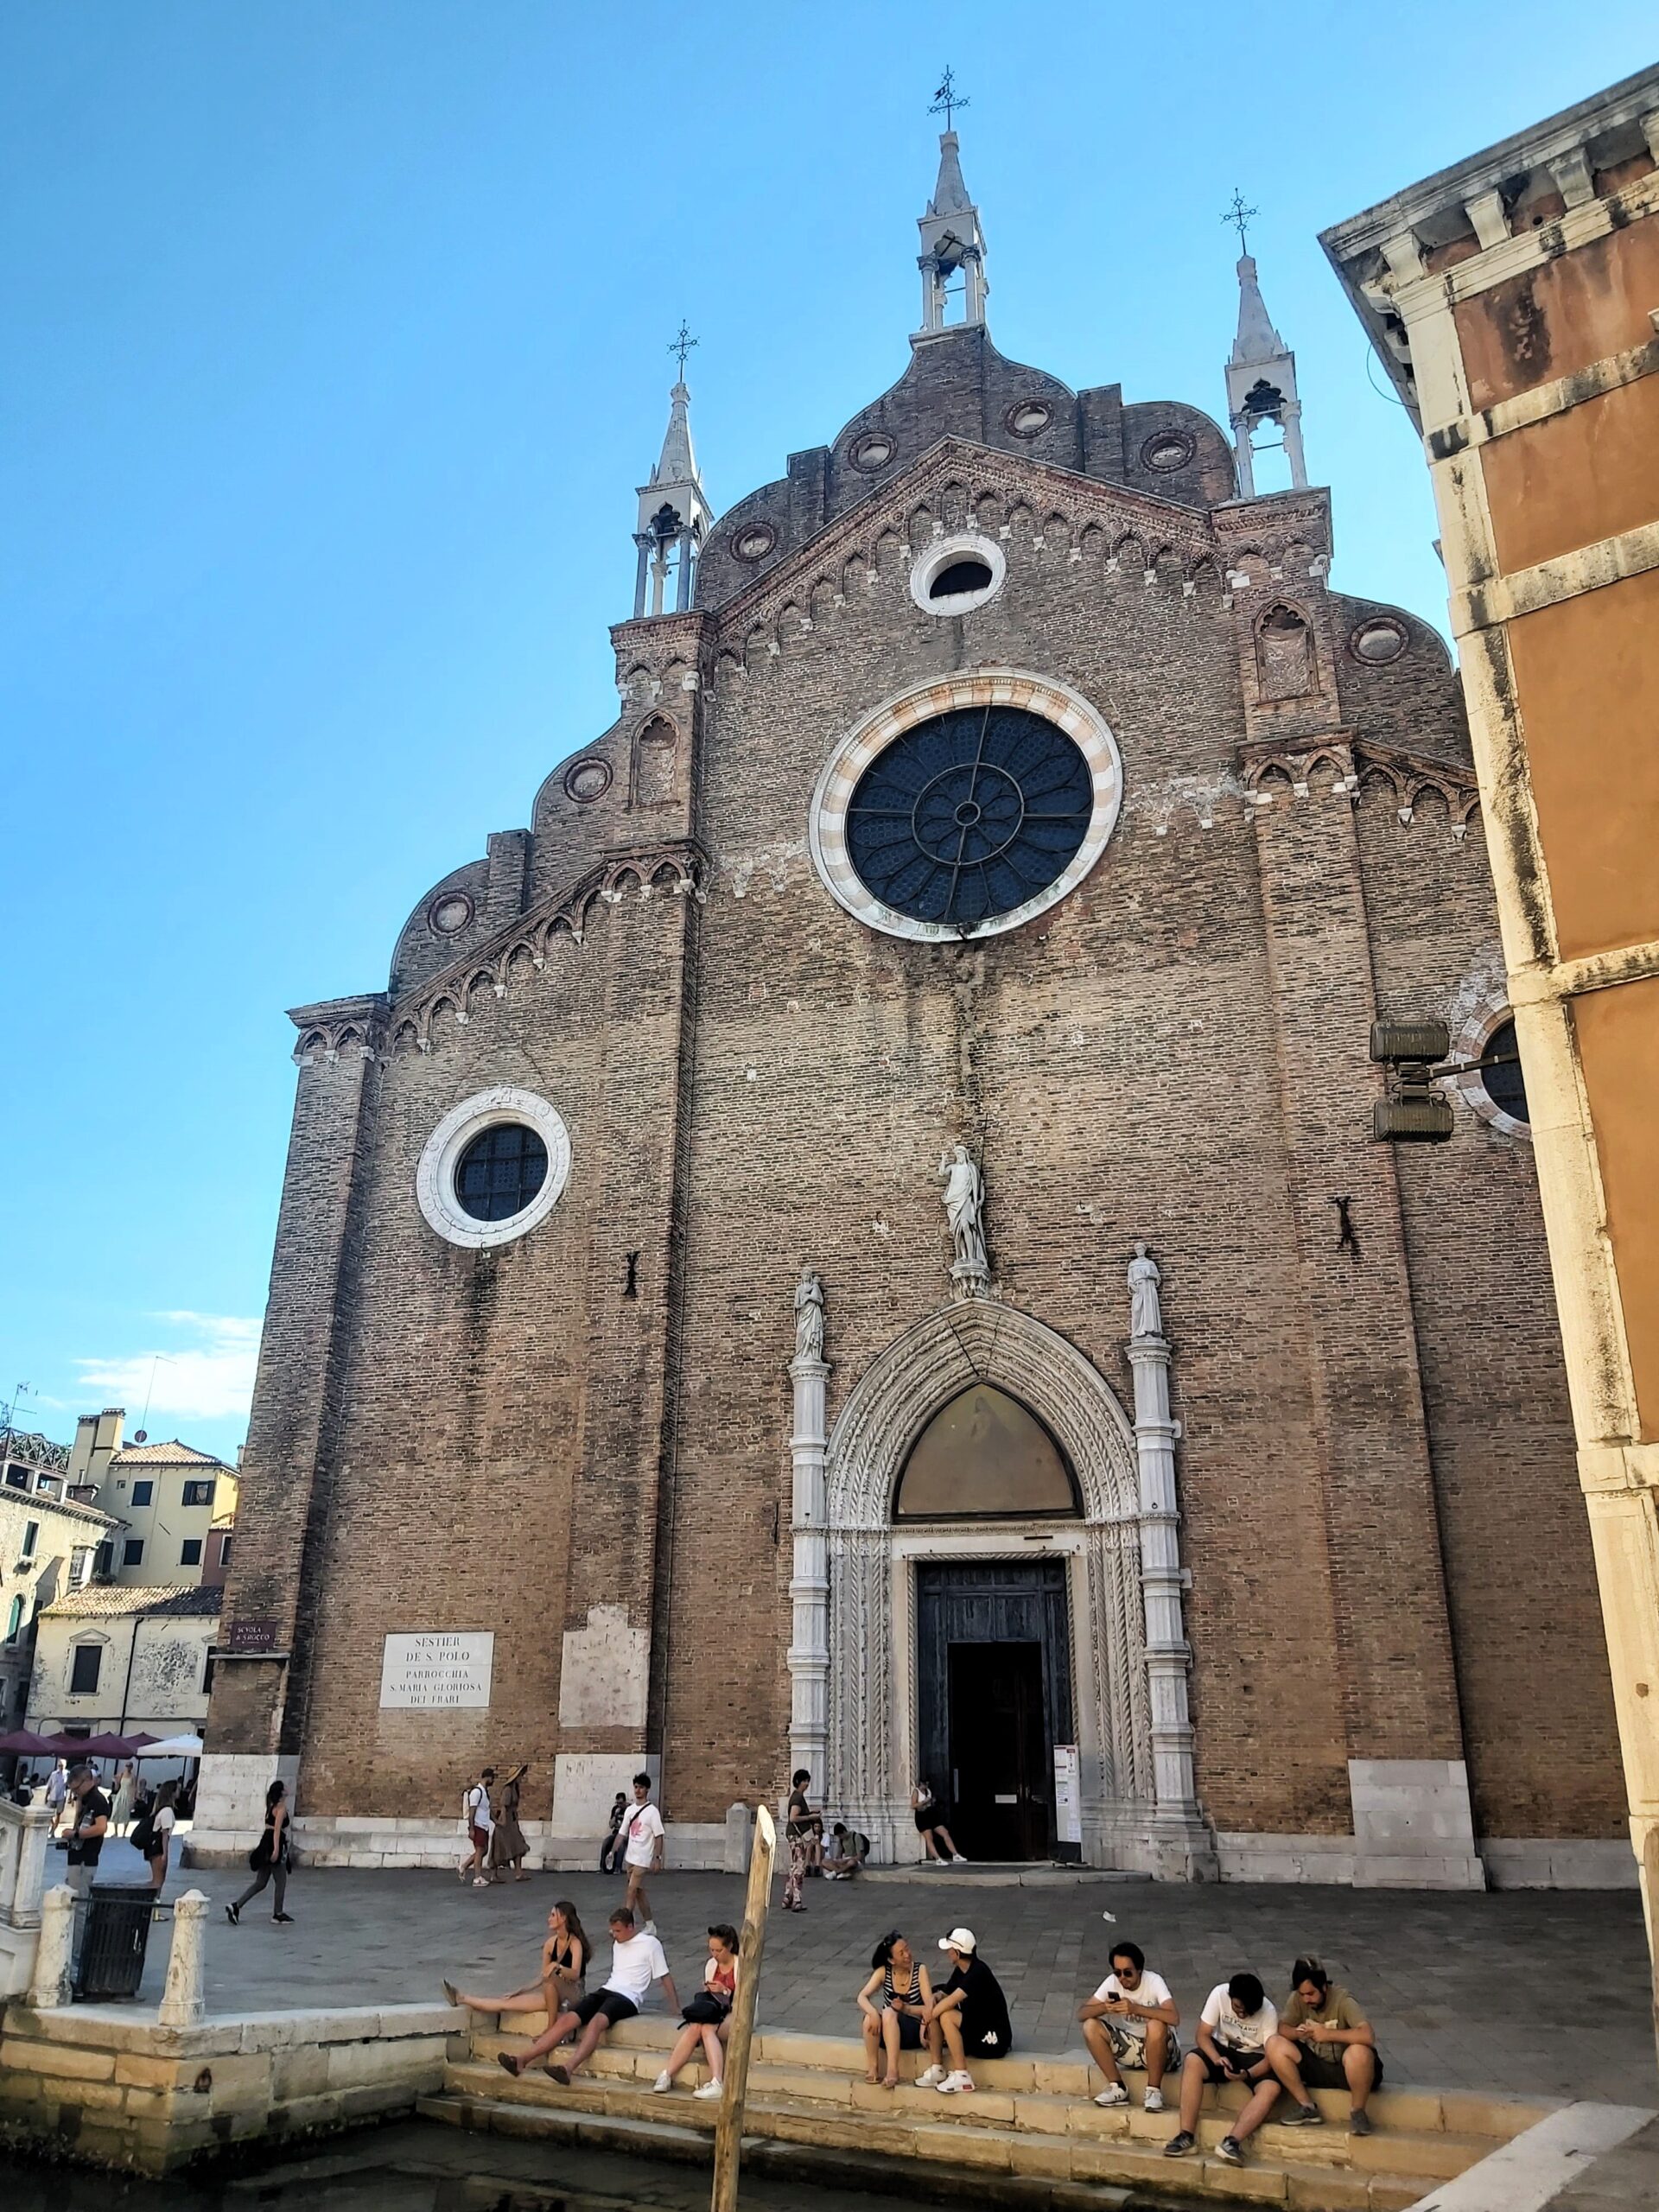 A church with arched doorway and circular window in Venice, Italy